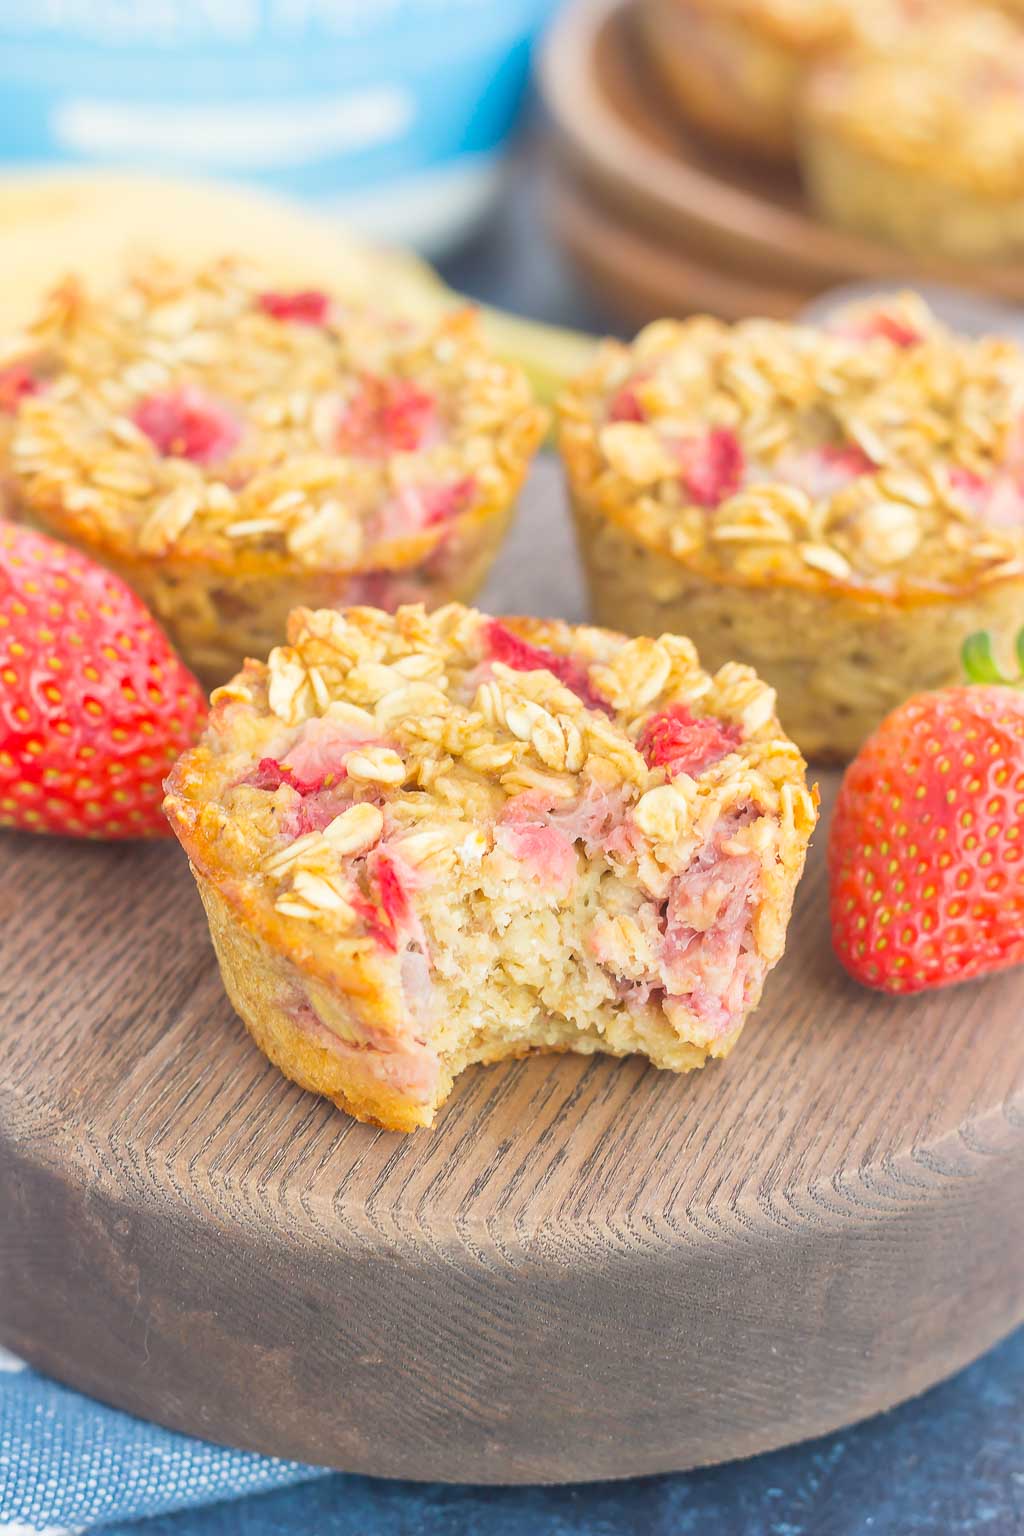 Three strawberry banana oatmeal cups on a wood platter. The front oatmeal cup has a bite missing. 